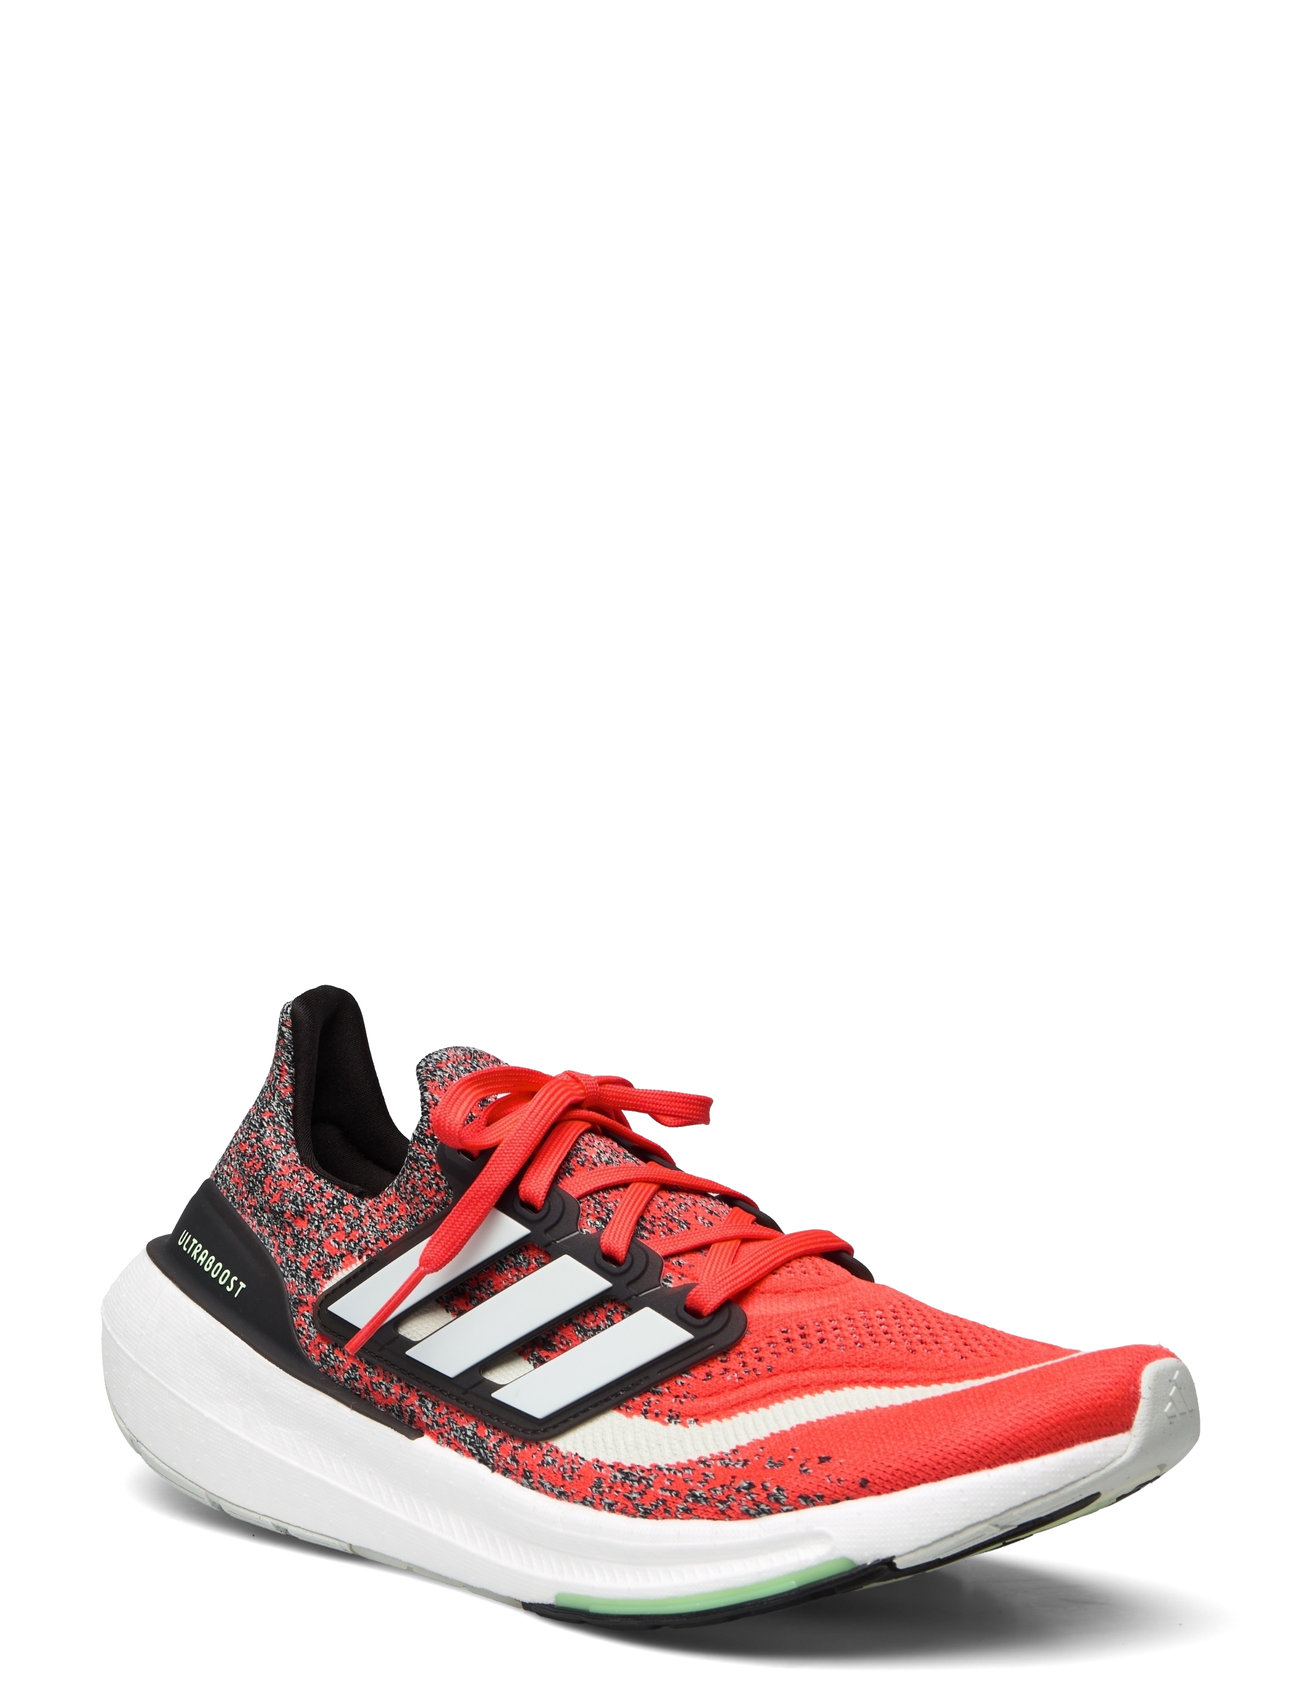 Ultraboost Light Sport Sport Shoes Running Shoes Red Adidas Performance